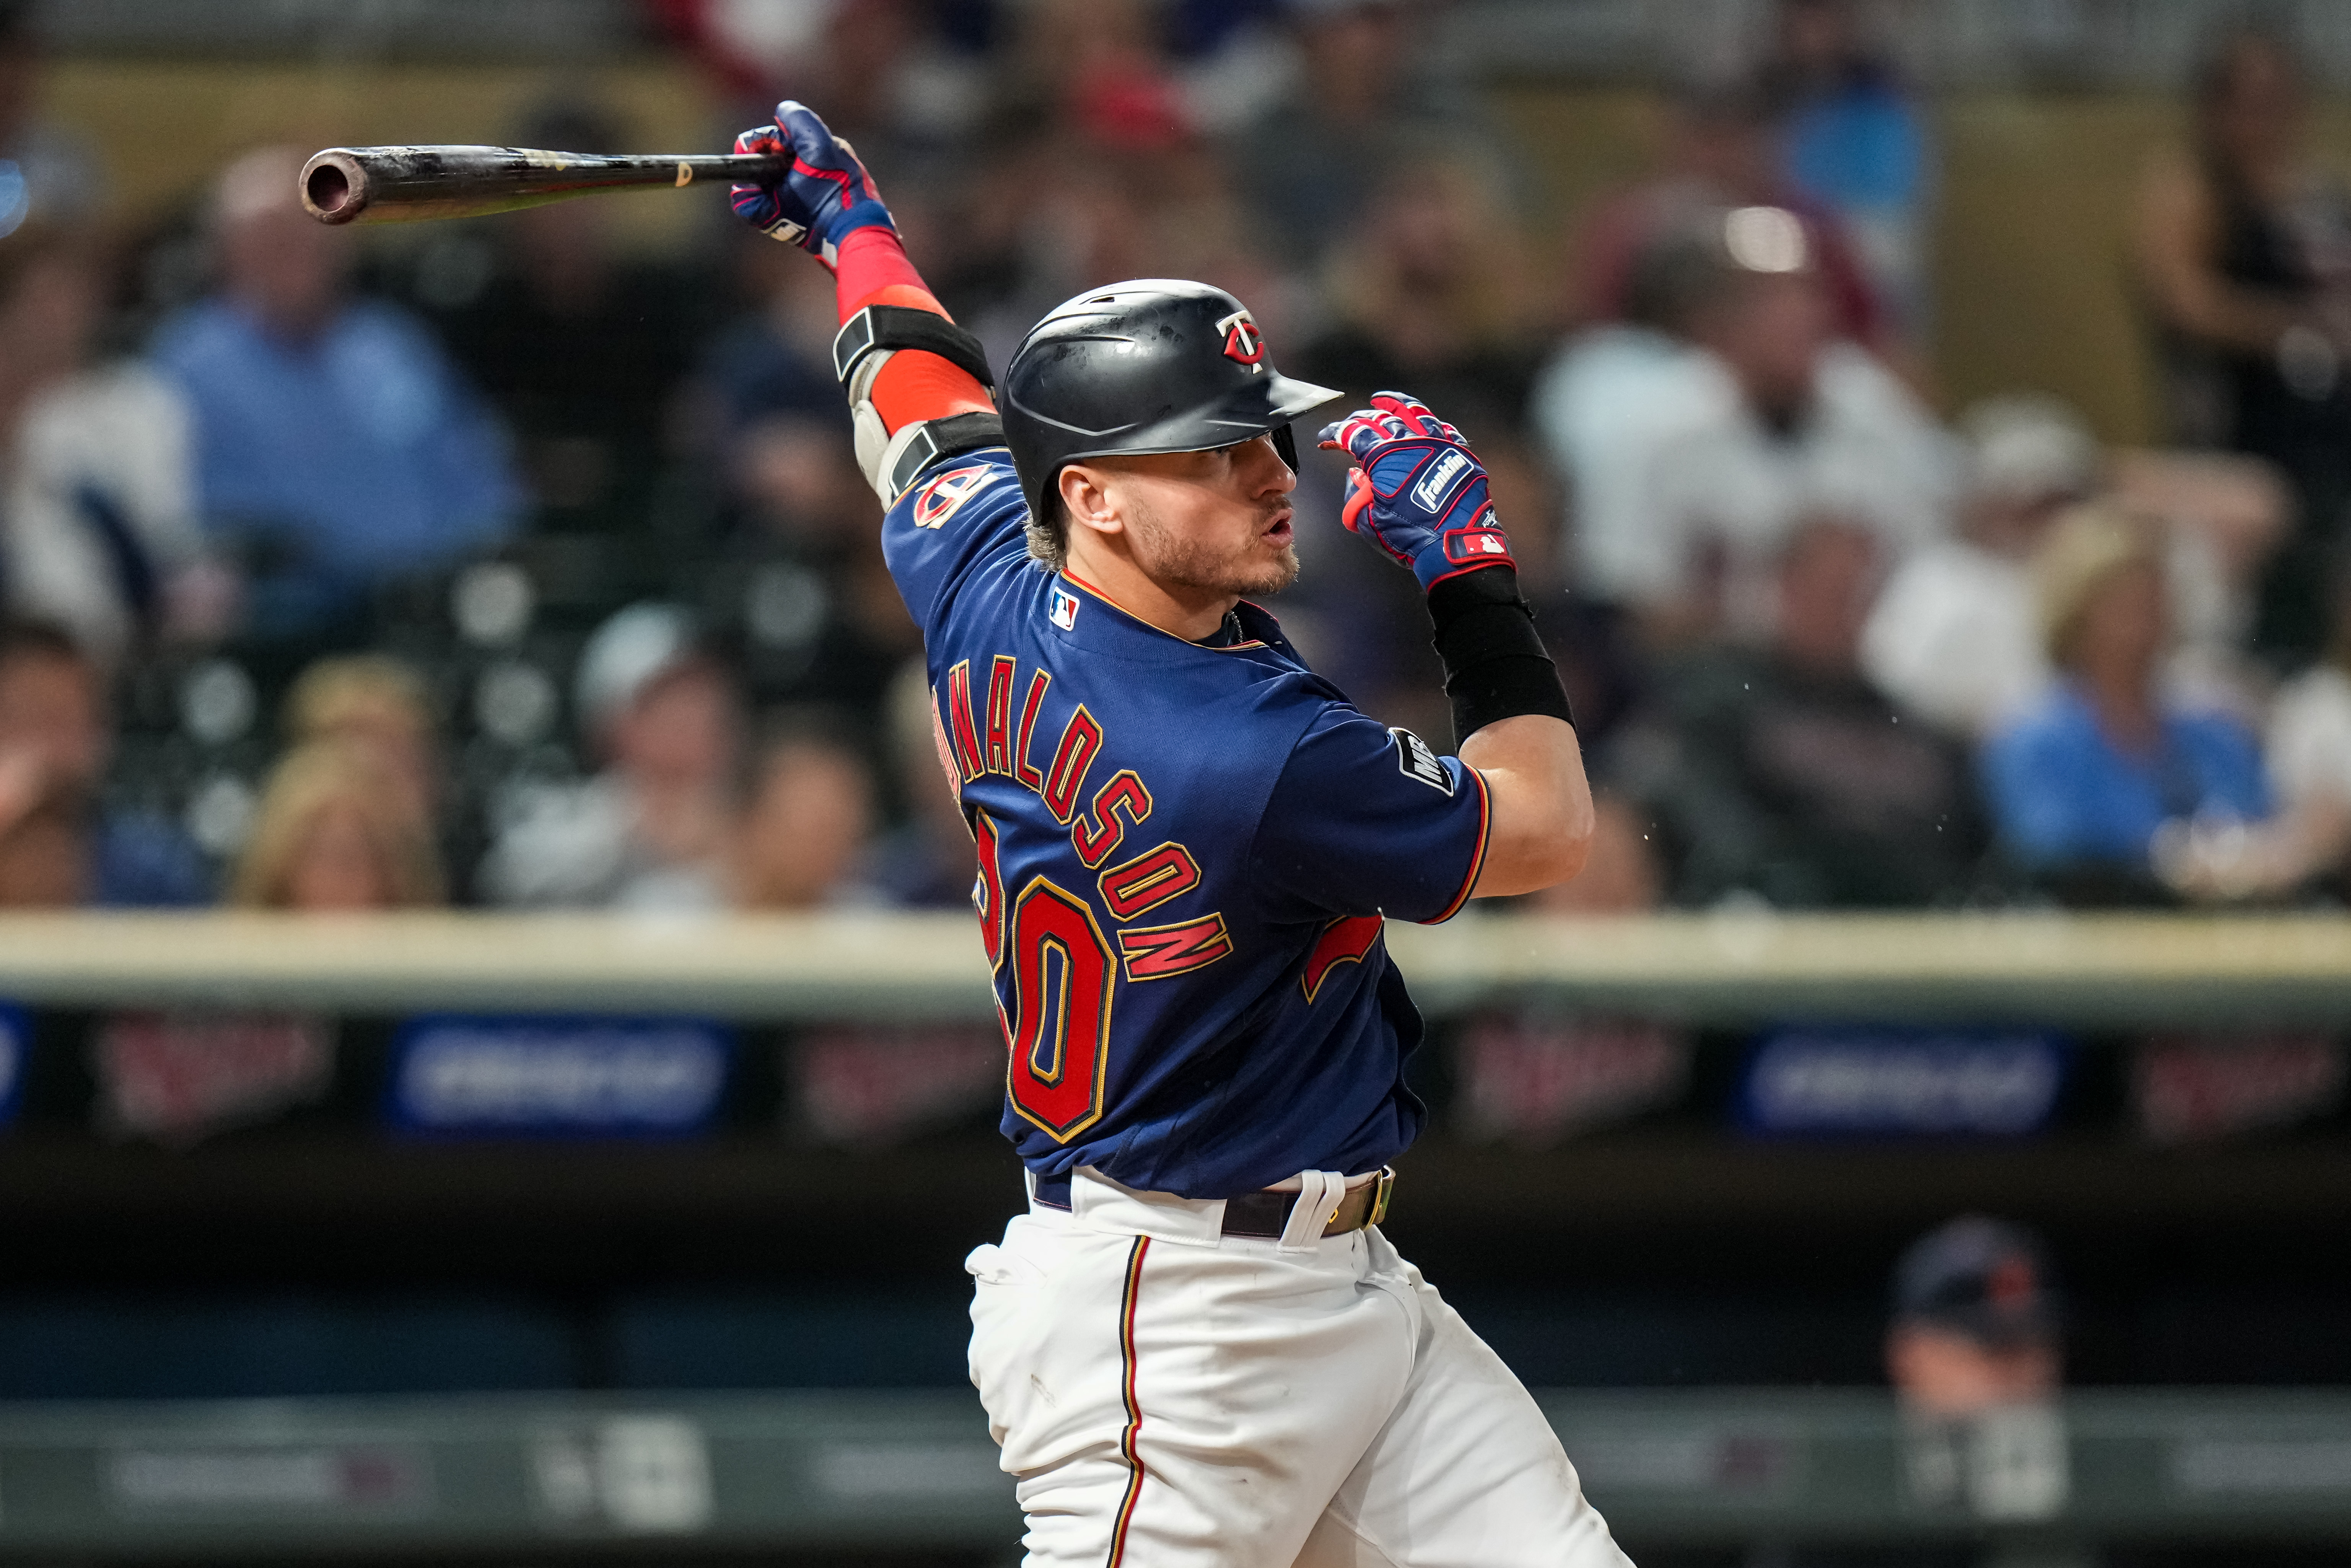 Yankees acquire former Blue Jay, AL MVP Josh Donaldson from Twins